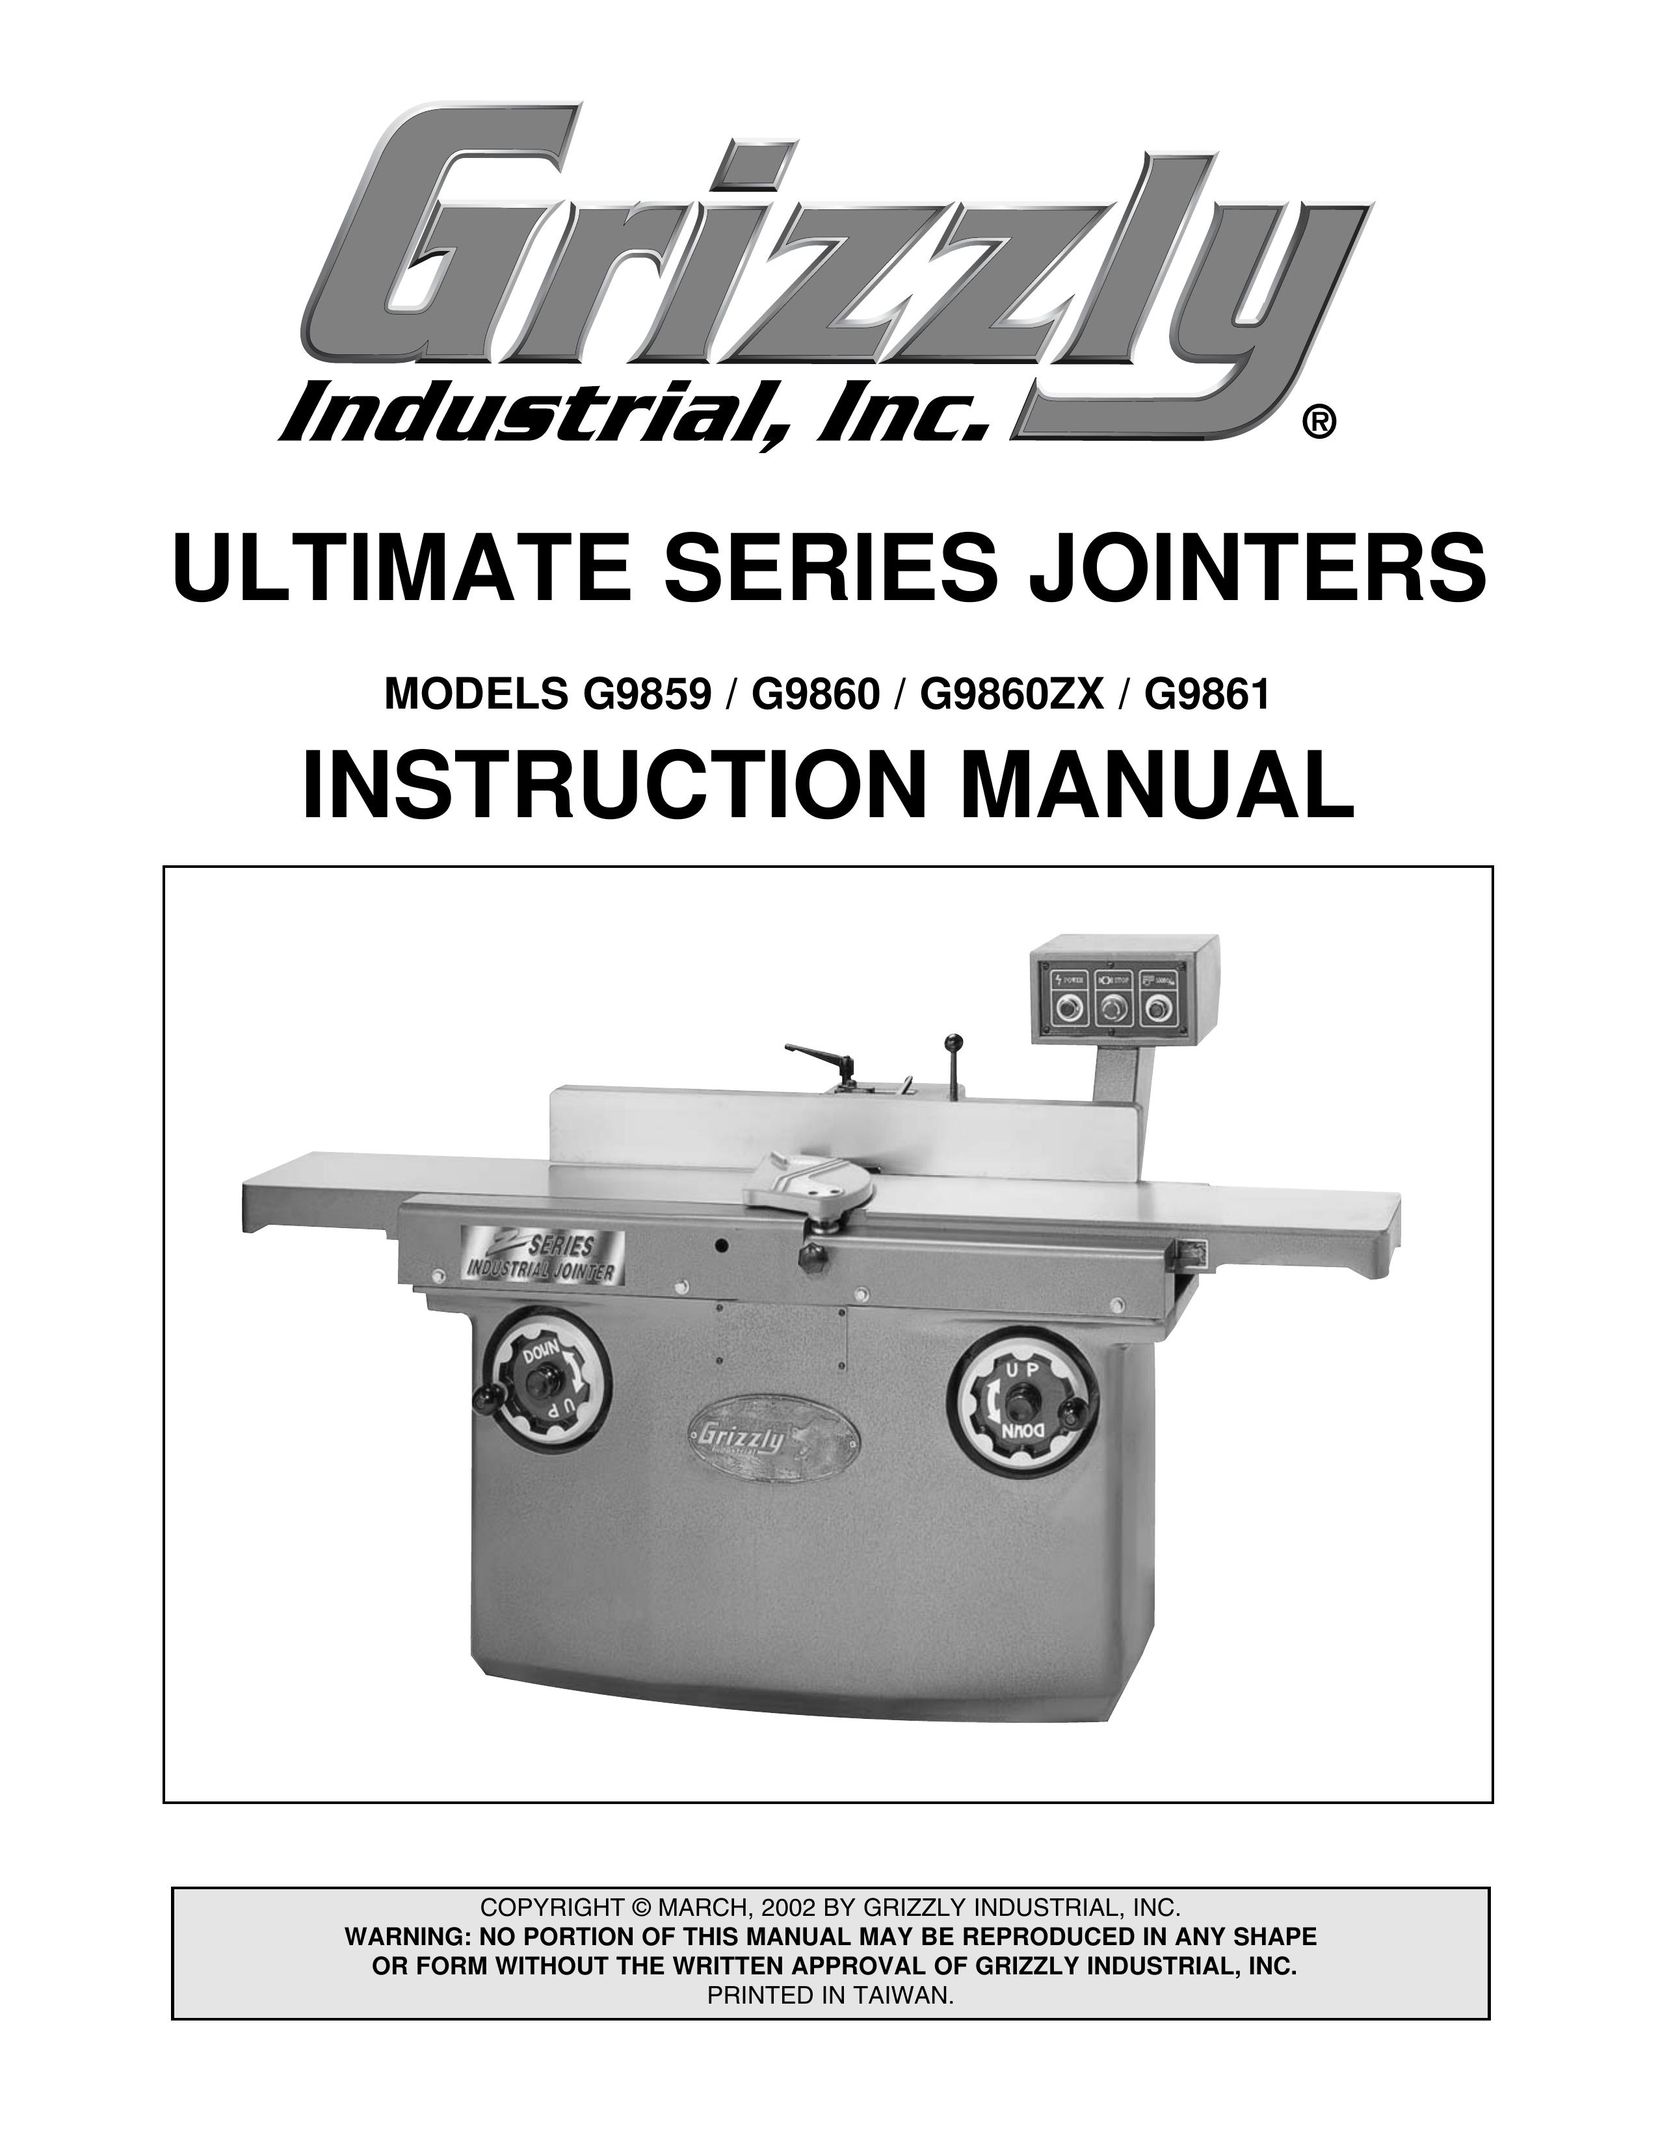 Grizzly G9860ZX Biscuit Joiner User Manual (Page 1)